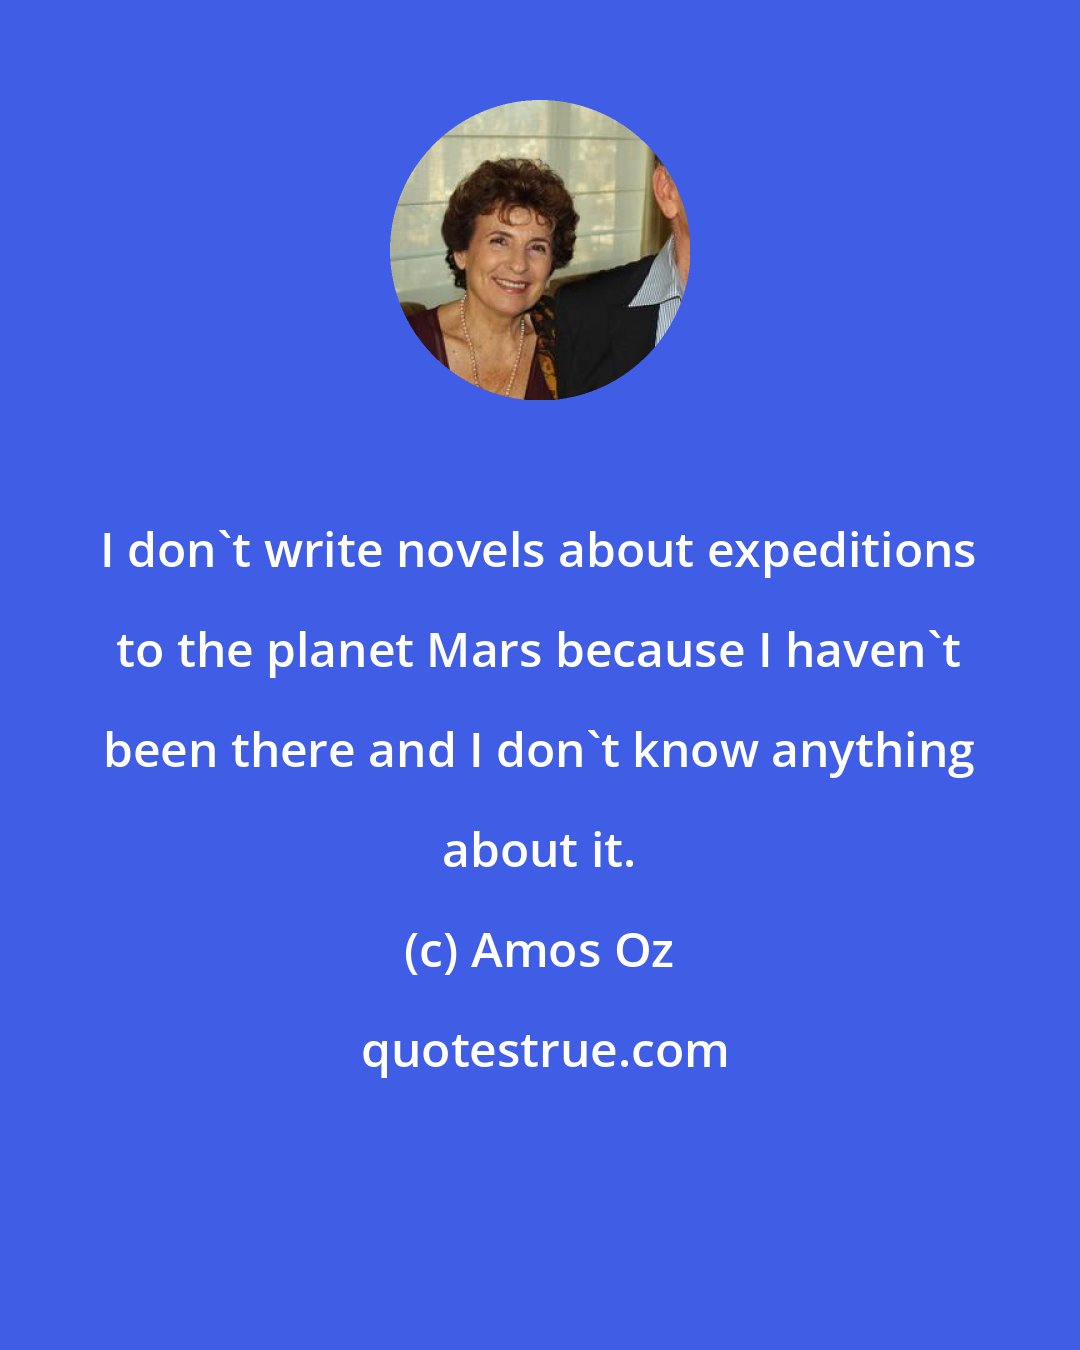 Amos Oz: I don't write novels about expeditions to the planet Mars because I haven't been there and I don't know anything about it.